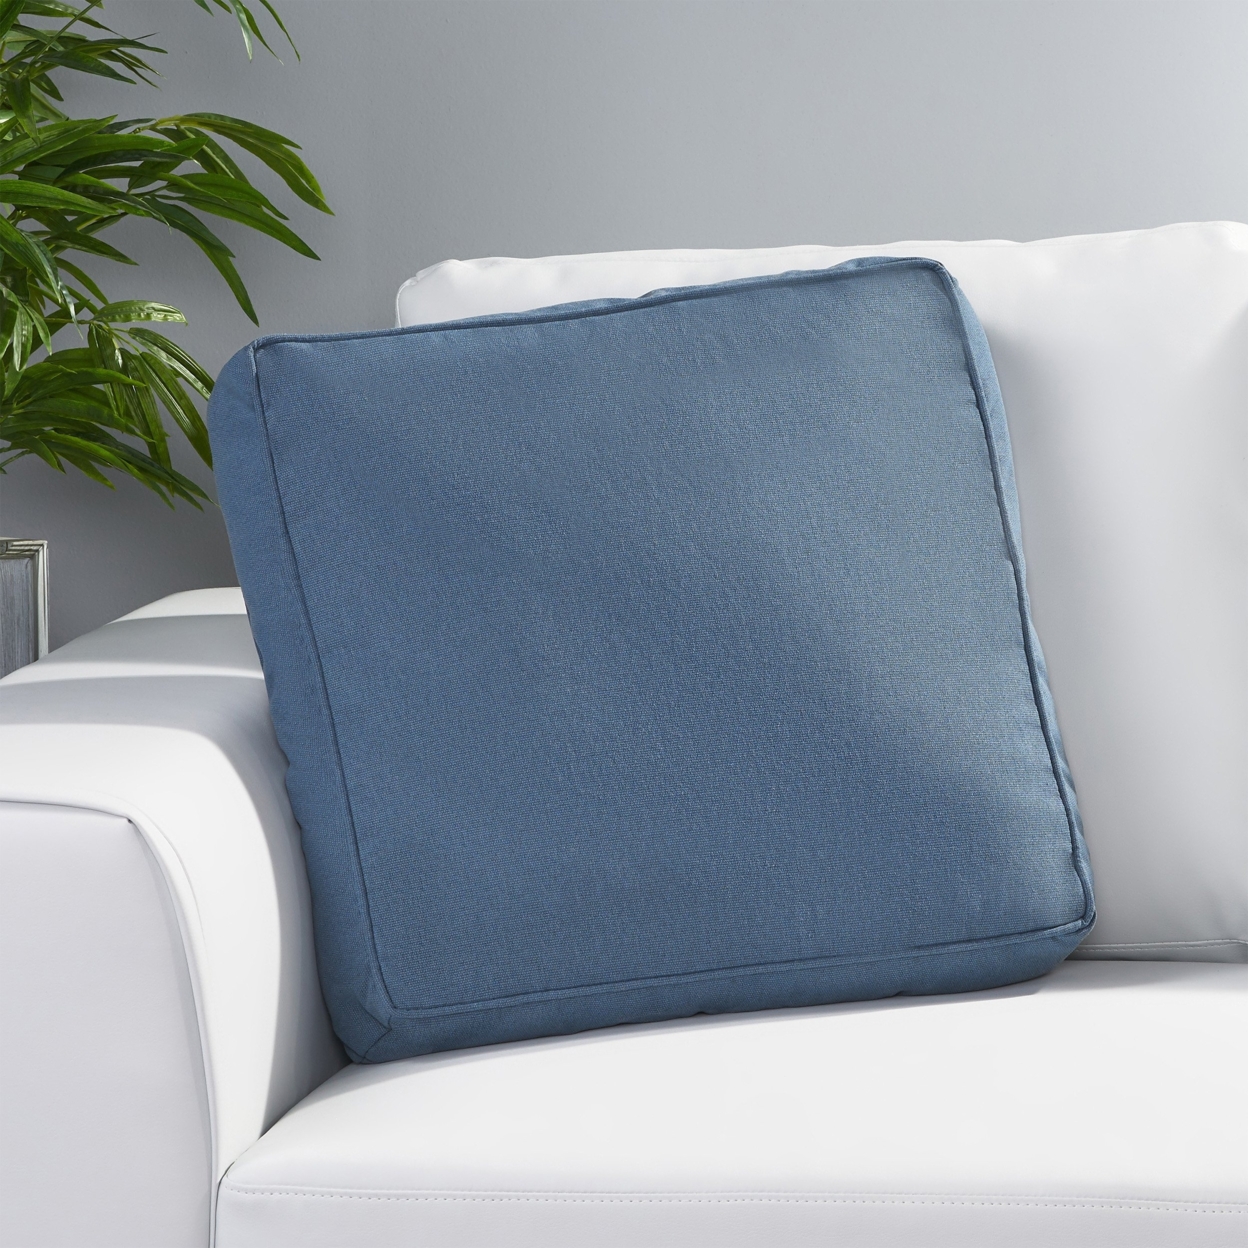 Kimani Square Water Resistant 18 Throw Pillow - Charcoal